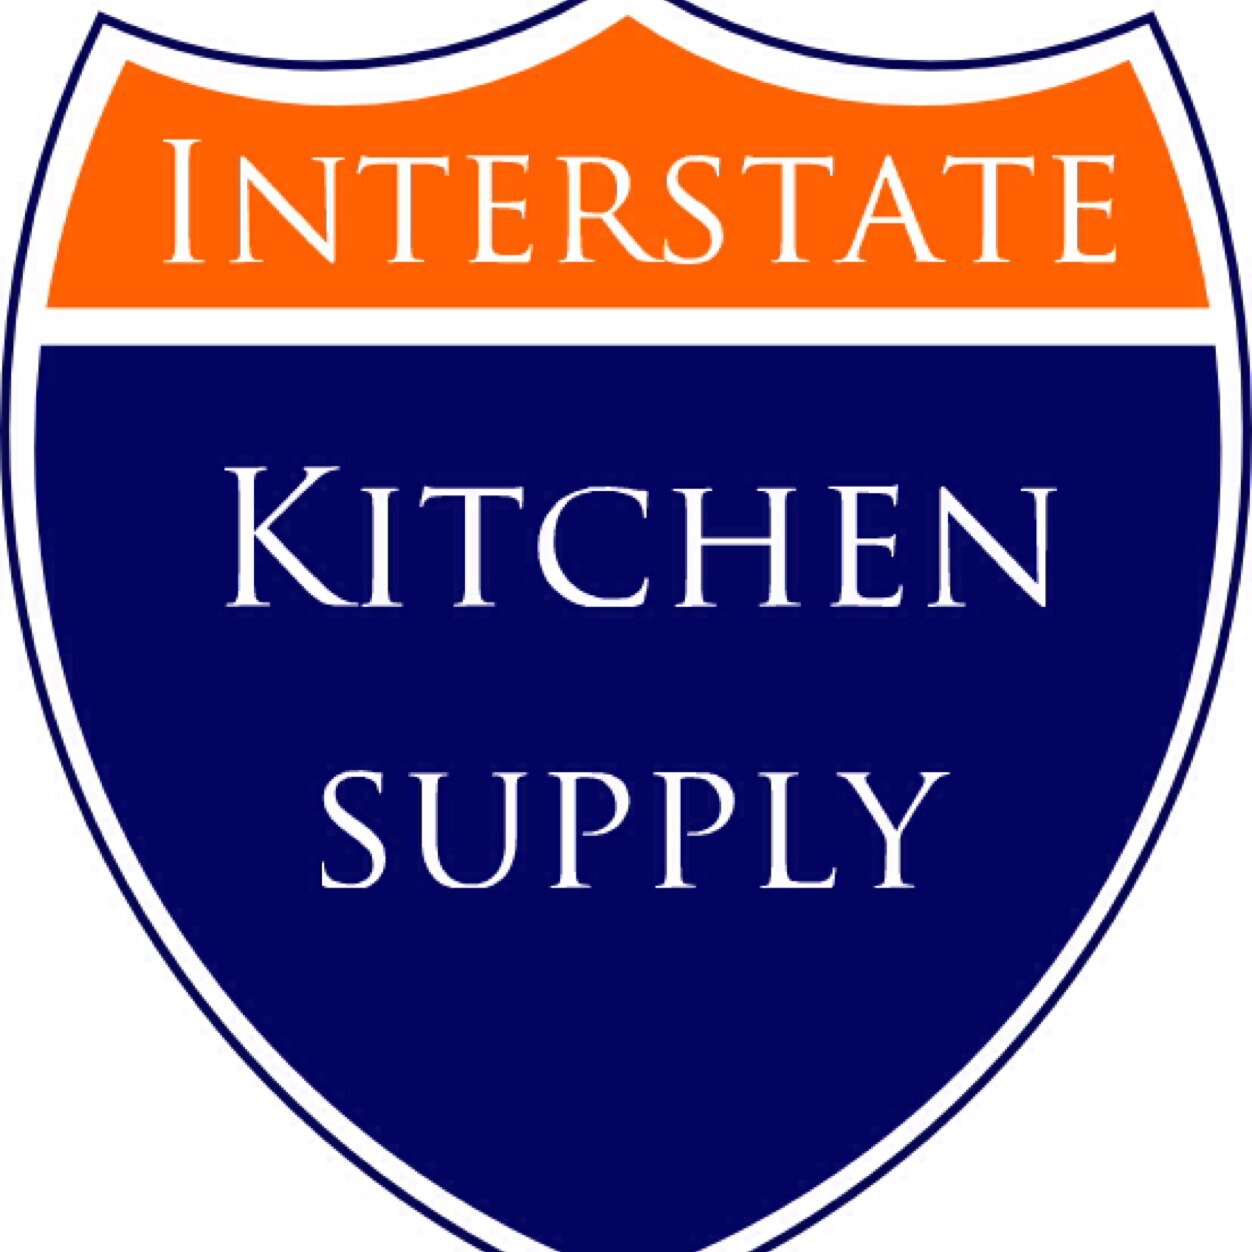 Interstate Kitchen Supply is a family-owned and operated appliance distributor for homebuilders, remodelers and their customers.